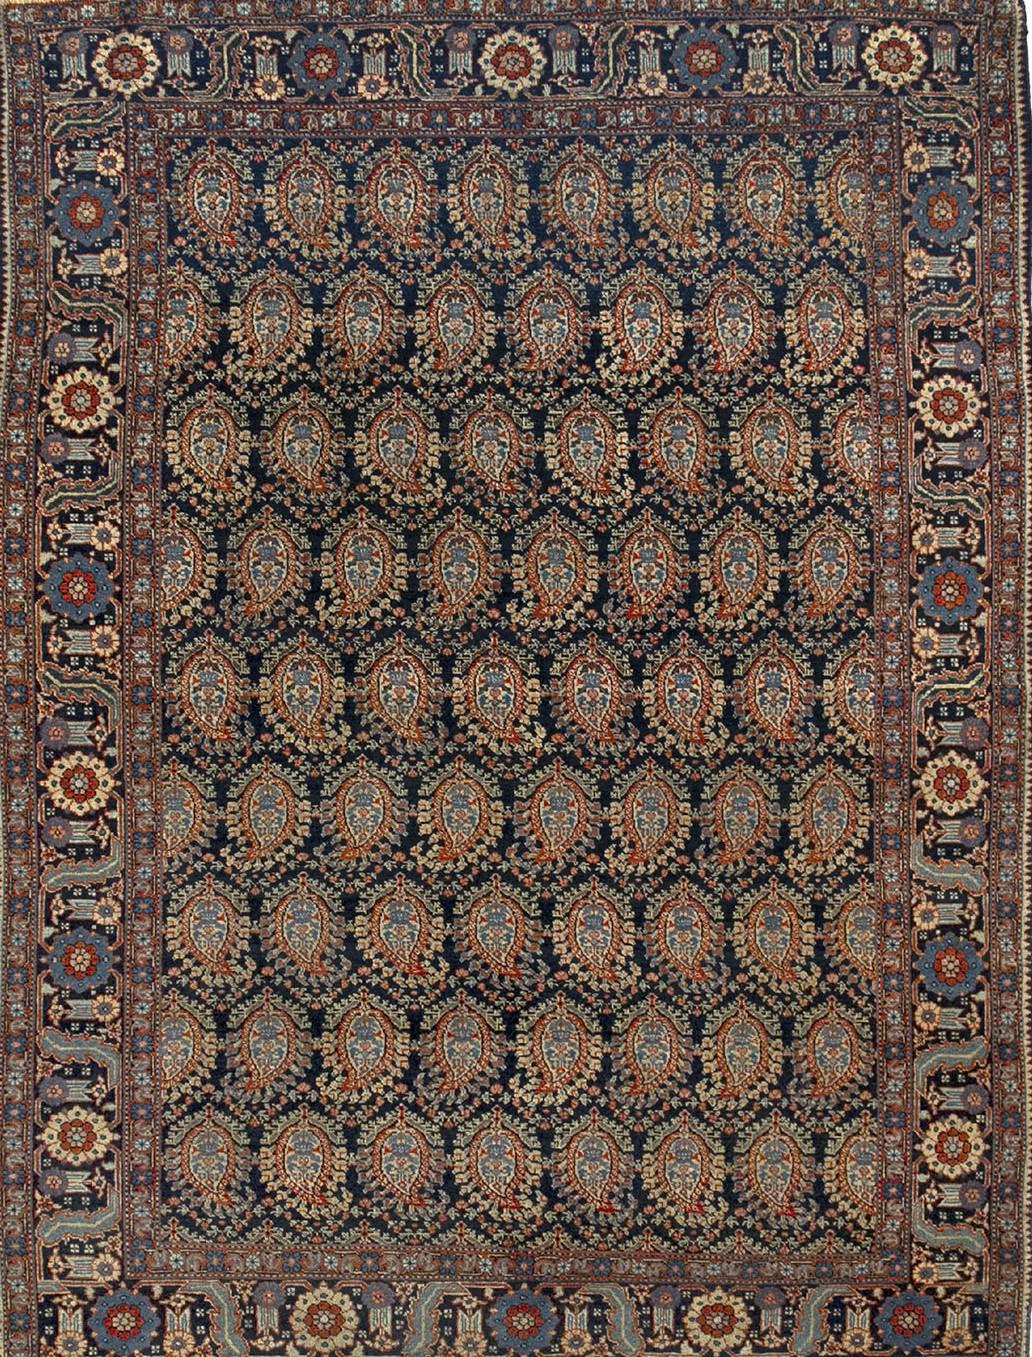 Small size Melayir Persian rug. Measurements 1.90 x 1.40 m.
 - Excellent work on an extremely fine knotted piece.
 - Small, interlocking design throughout the central field of great decorative richness.
 - It is a rug that is ideal for an office or